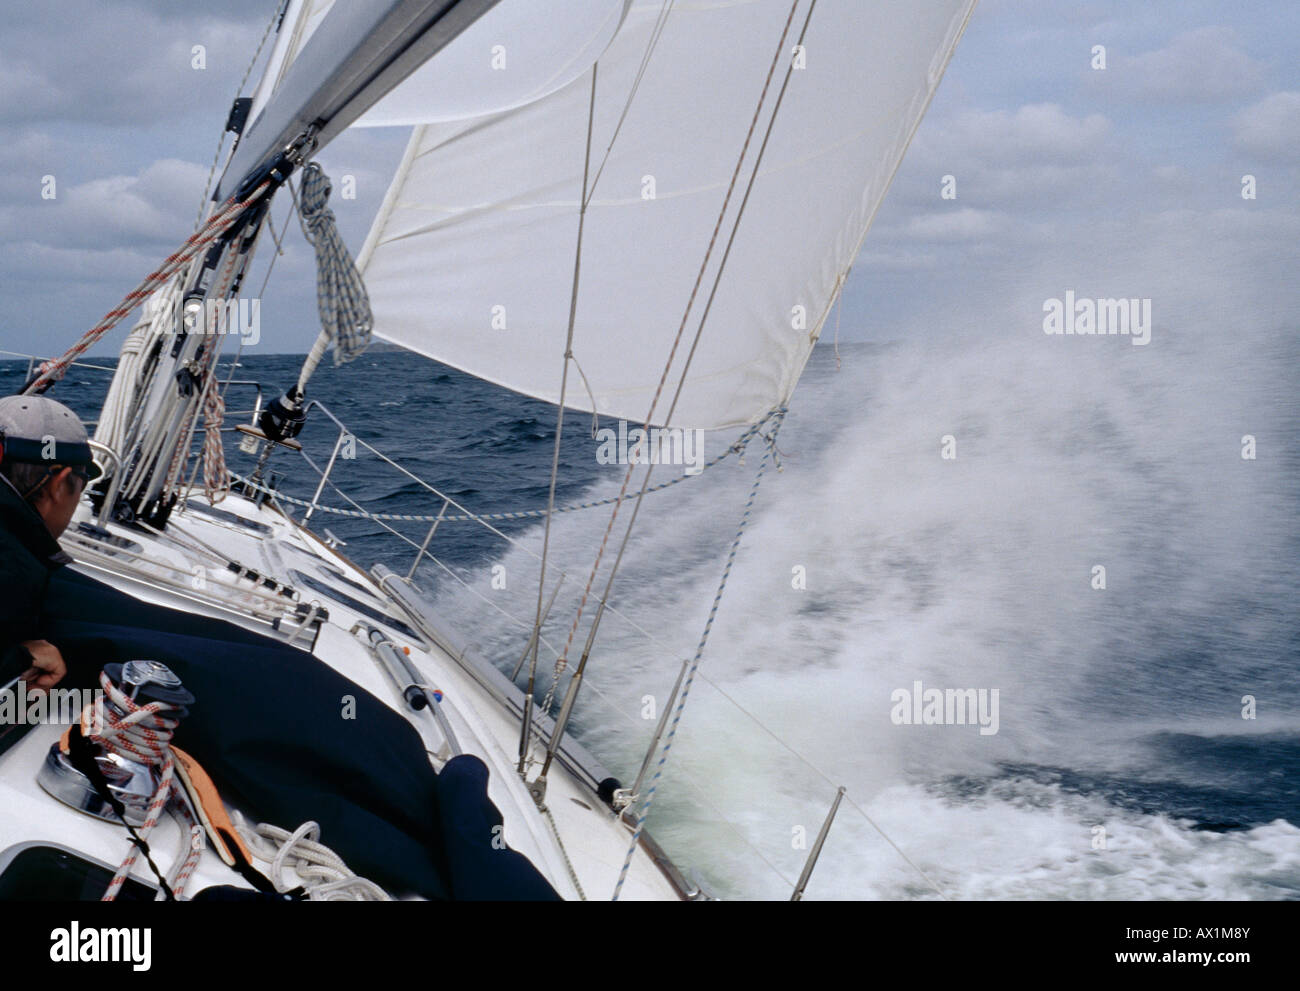 A man steering a yacht in rough weather Stock Photo